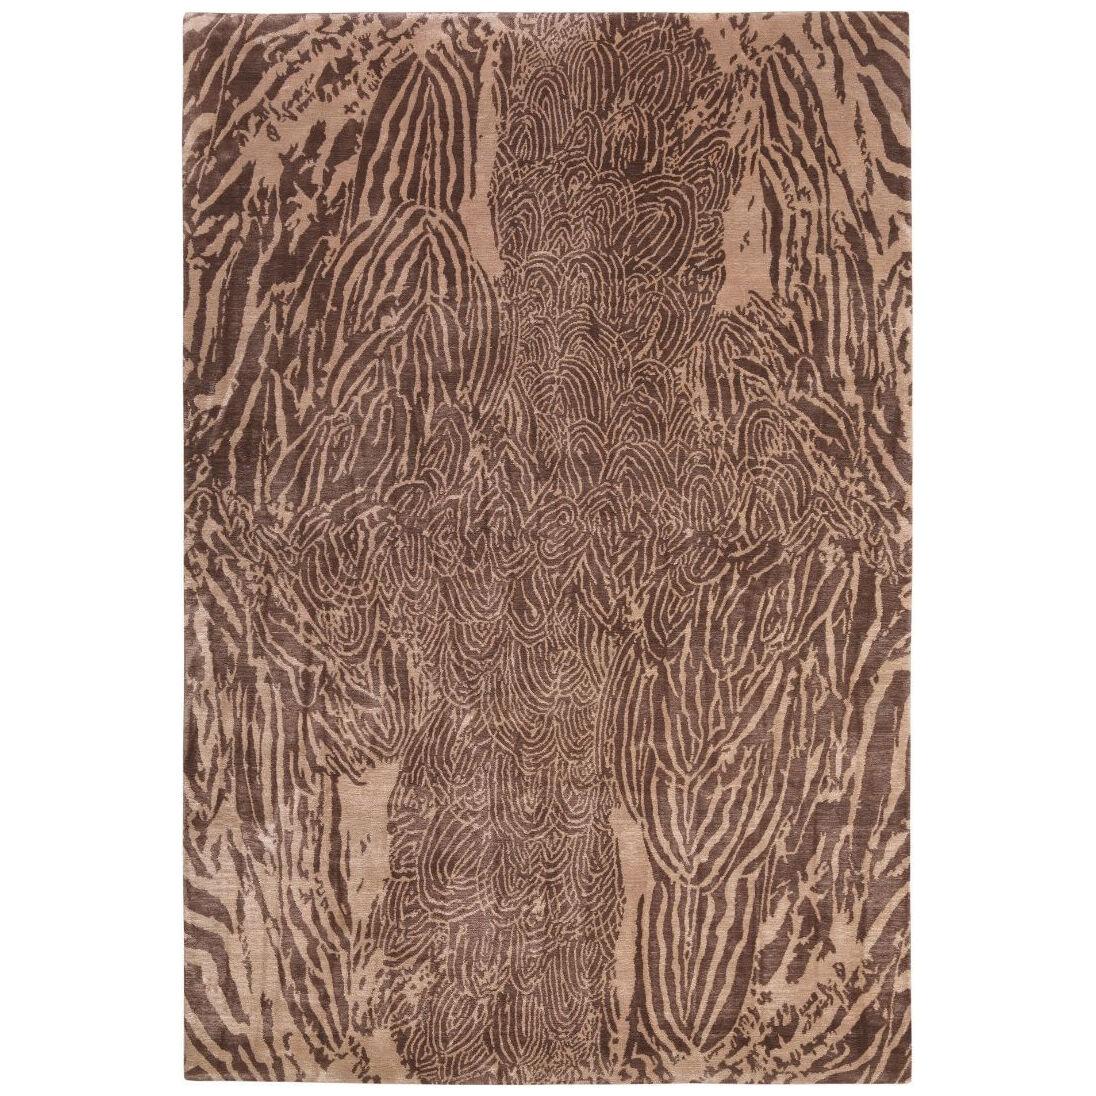 Hand Woven Alexander McQueen, "Feathers", Silk Large Area Rug 